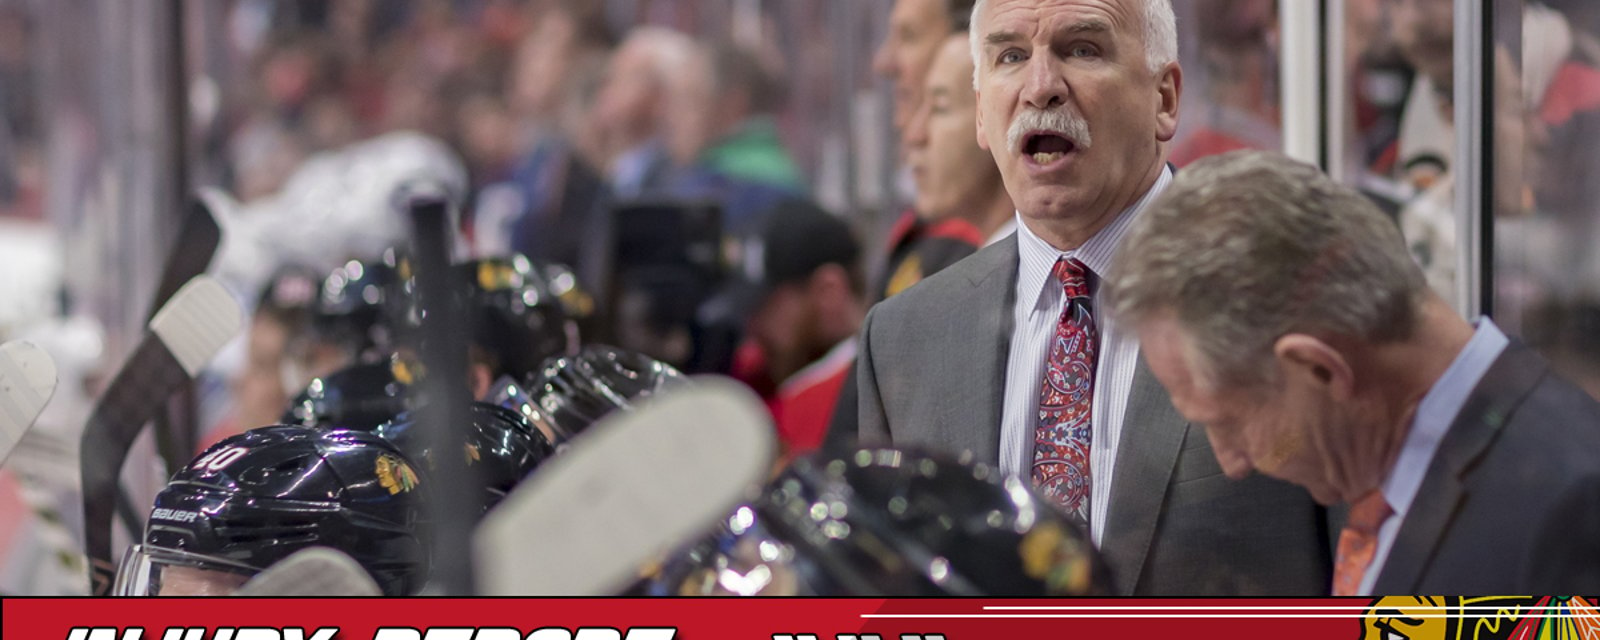 Injury Report: Joel Quenneville confirms one key player is out for tonight.